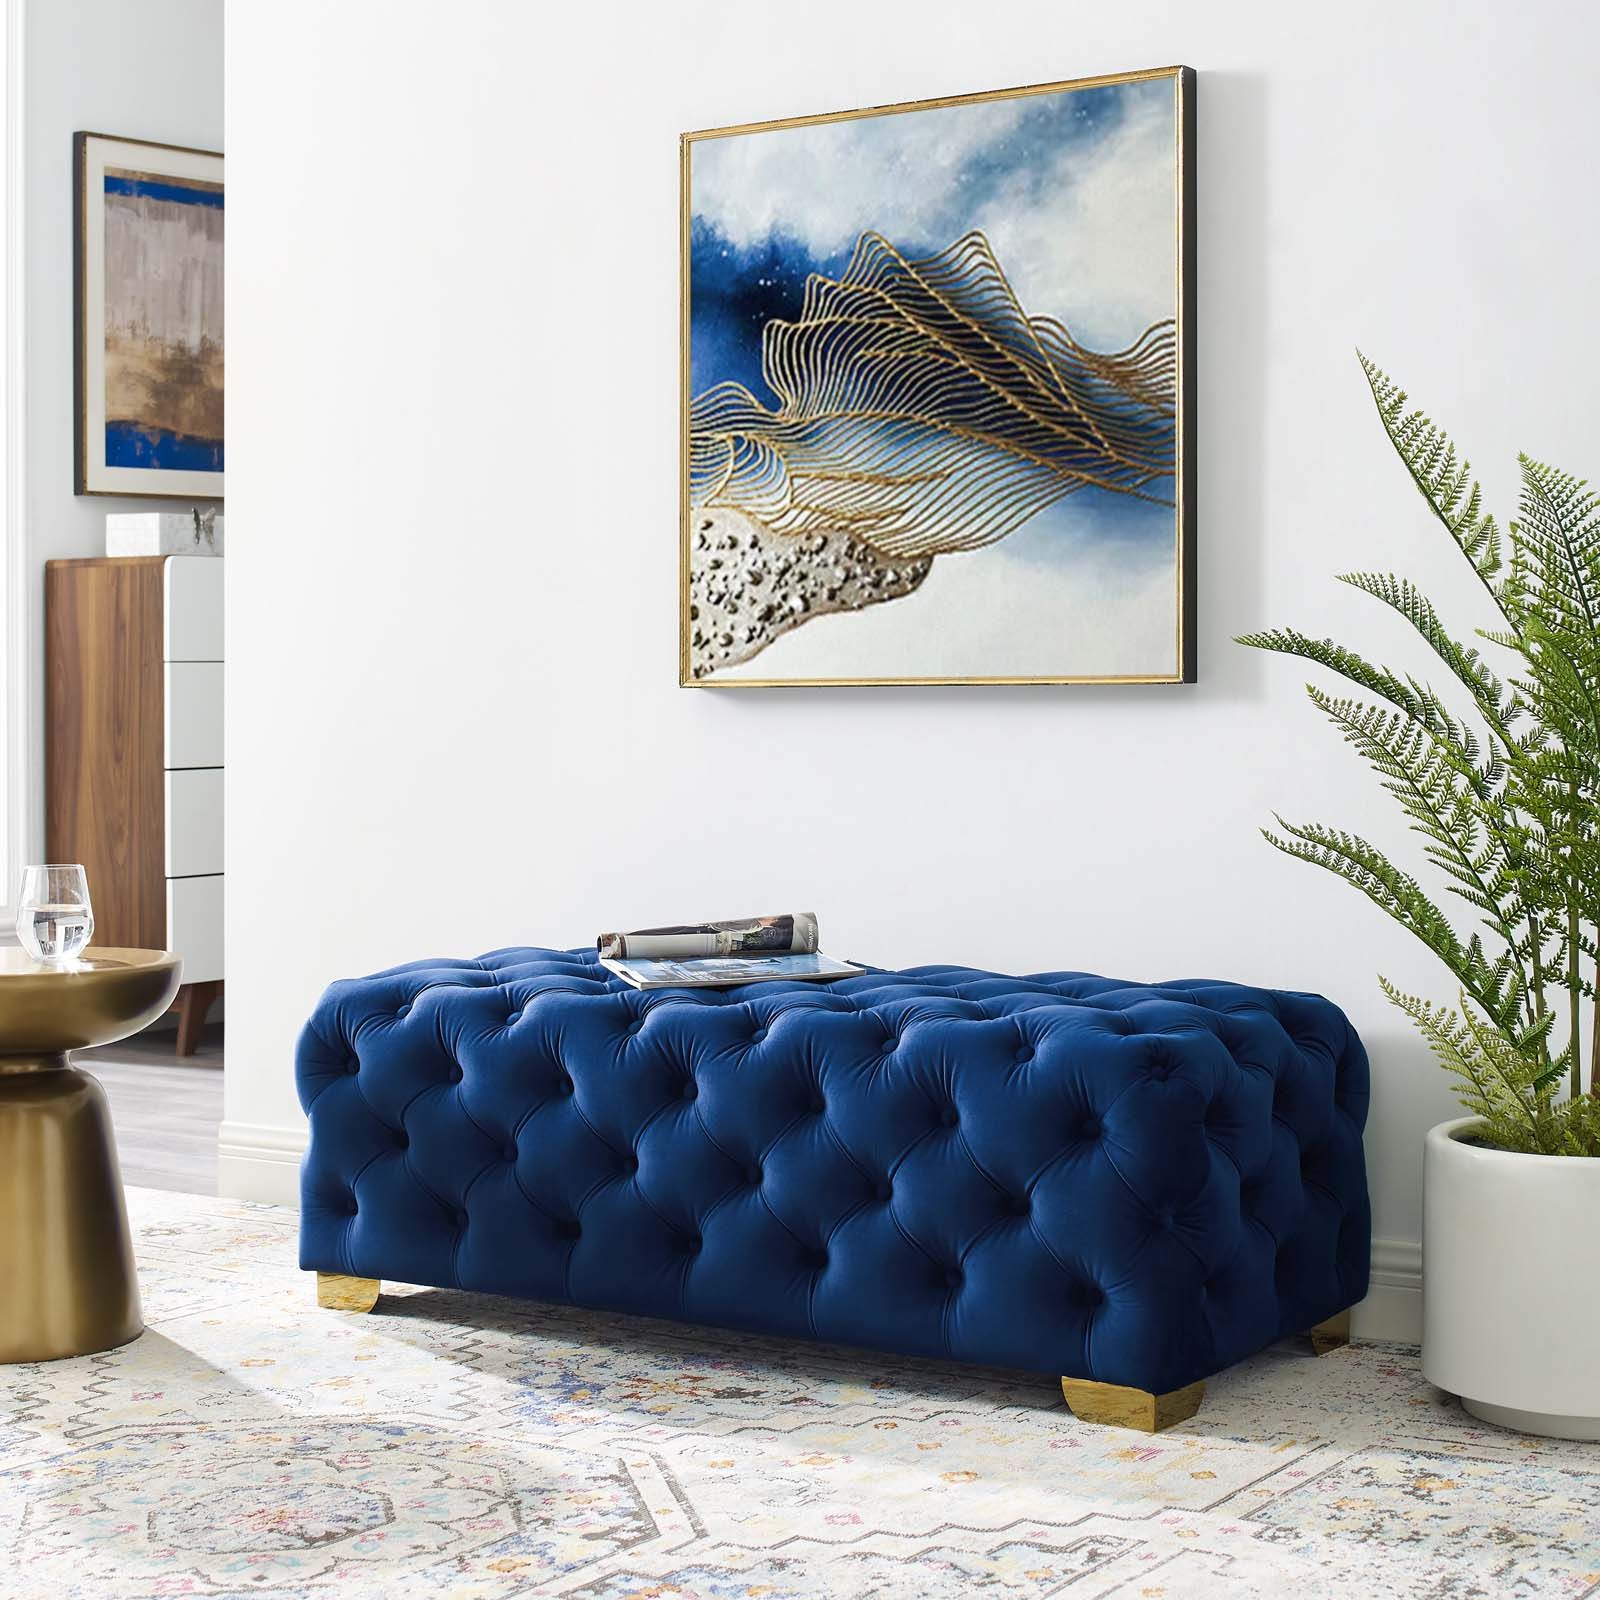 Sensible Button Tufted Performance Velvet Bench Navy Pertaining To Navy Velvet Fabric Benches (View 4 of 20)